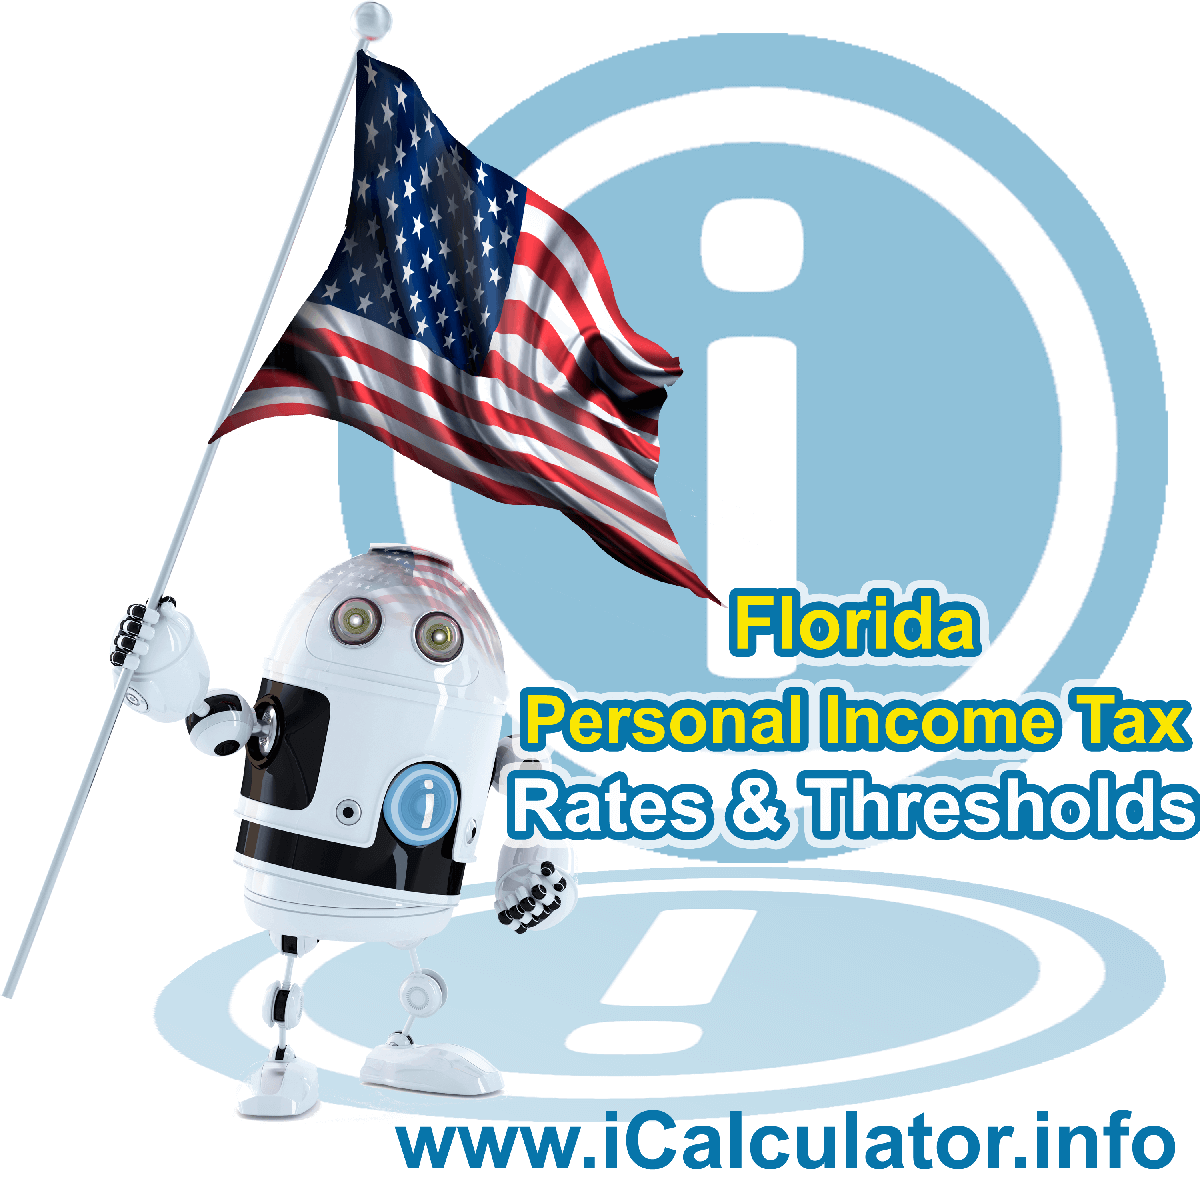 Florida State Tax Tables 2014. This image displays details of the Florida State Tax Tables for the 2014 tax return year which is provided in support of the 2014 US Tax Calculator